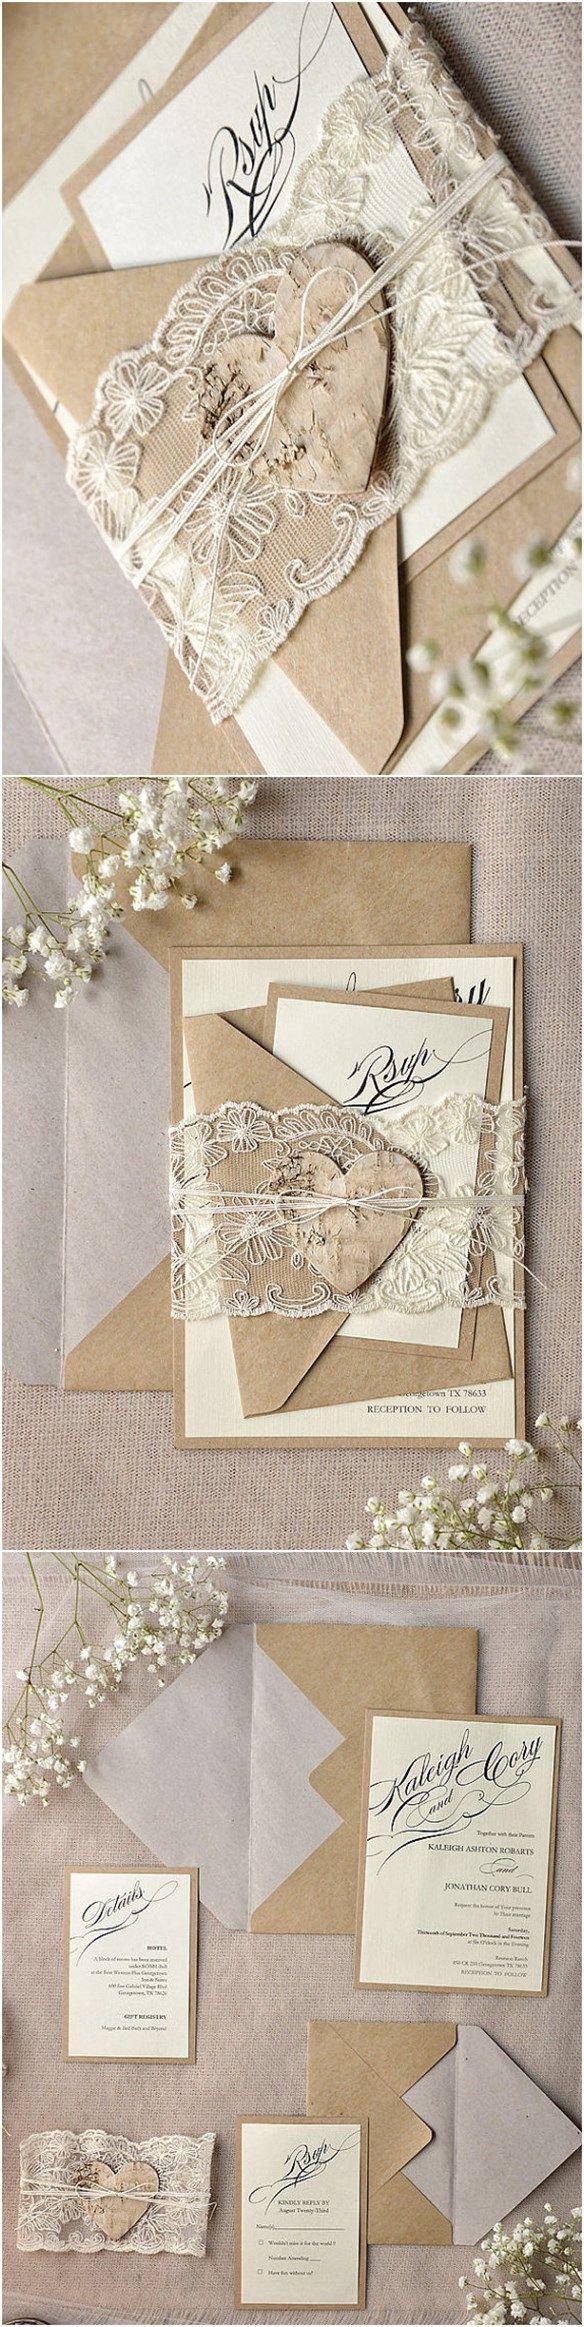 Mariage - Rustic Calligraphy Recycled Lace Wedding Invitation Kits